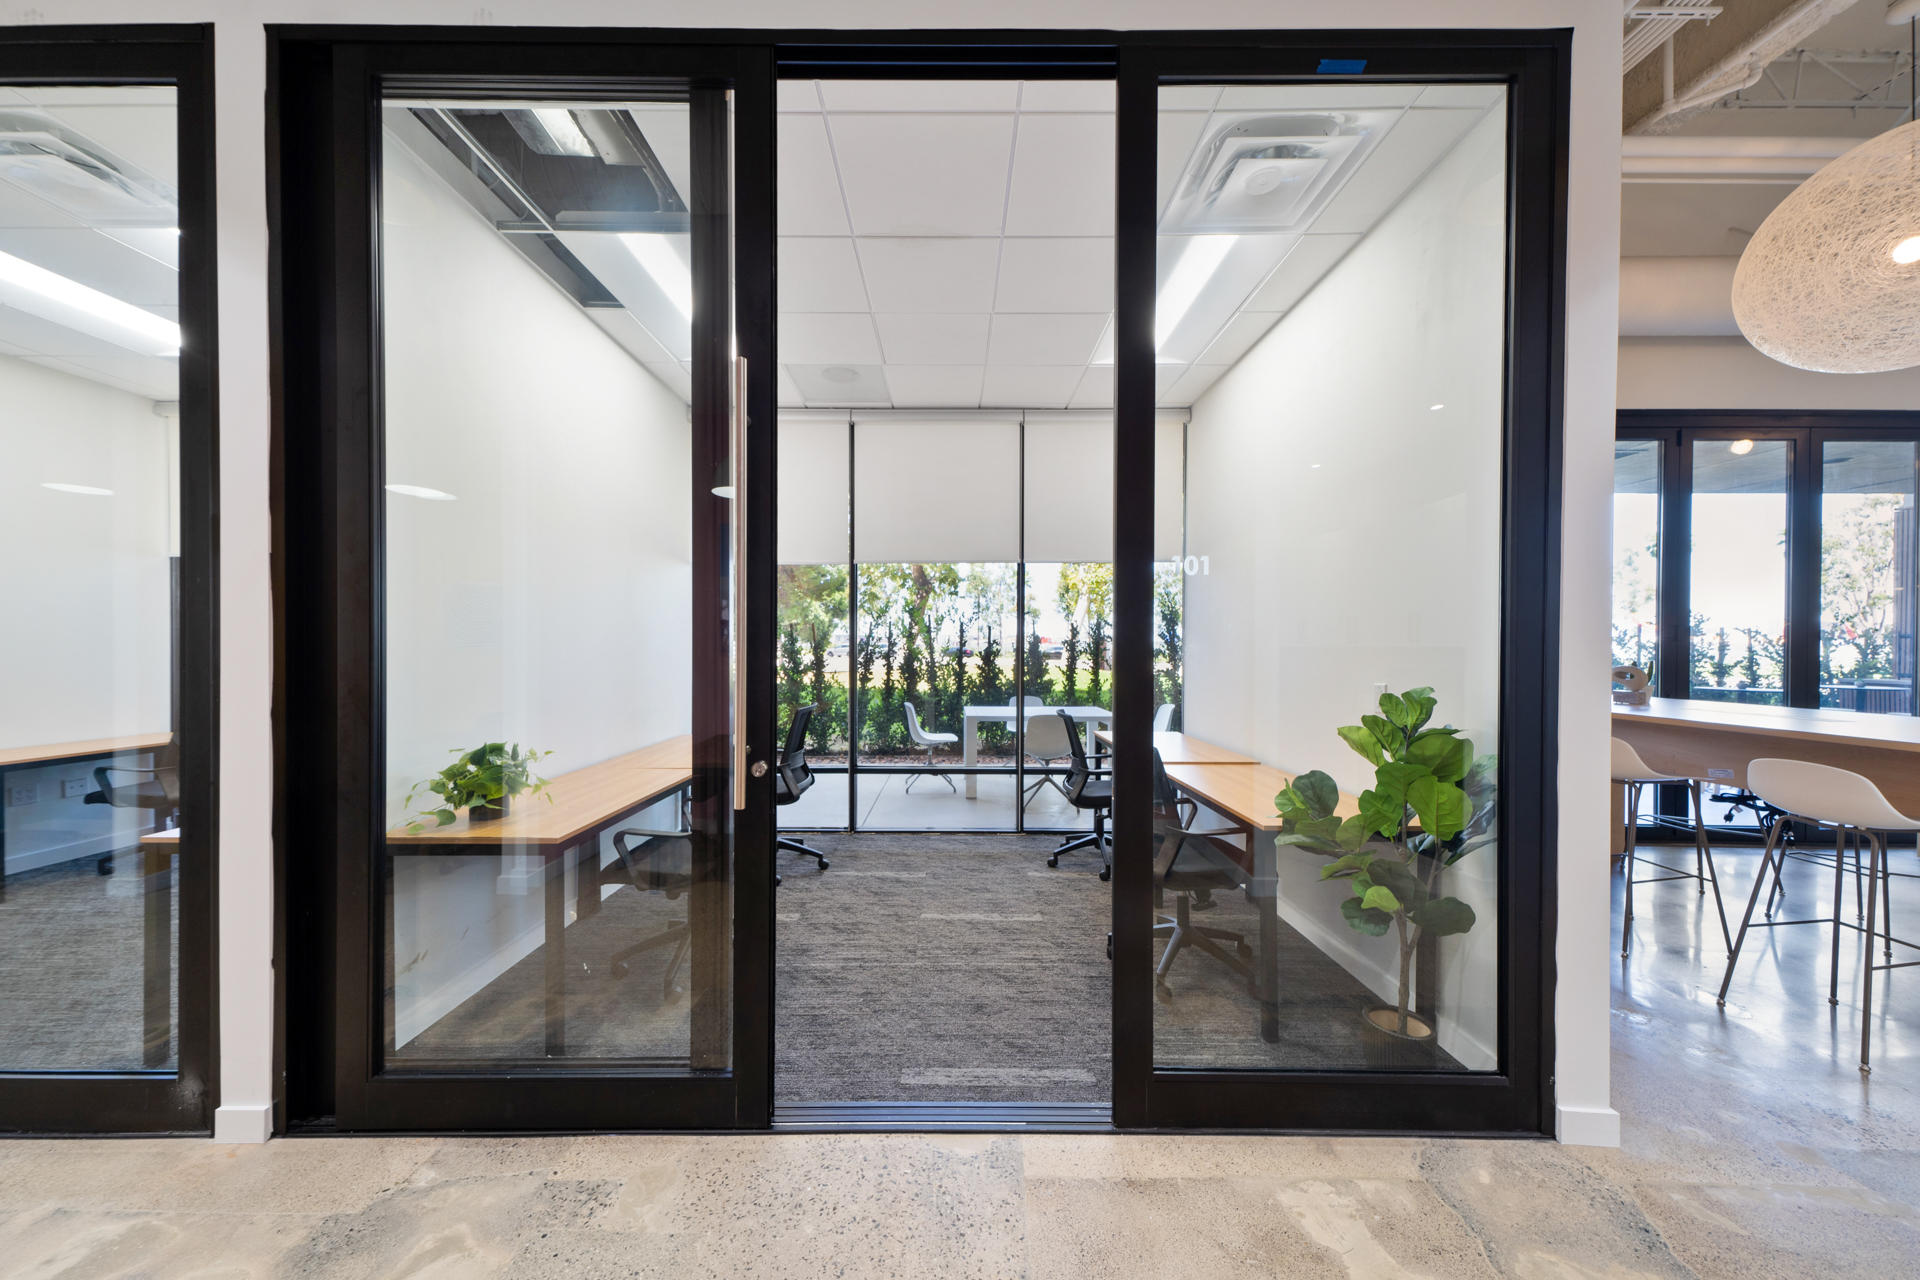 Private office space with glass windows that you can see into it through